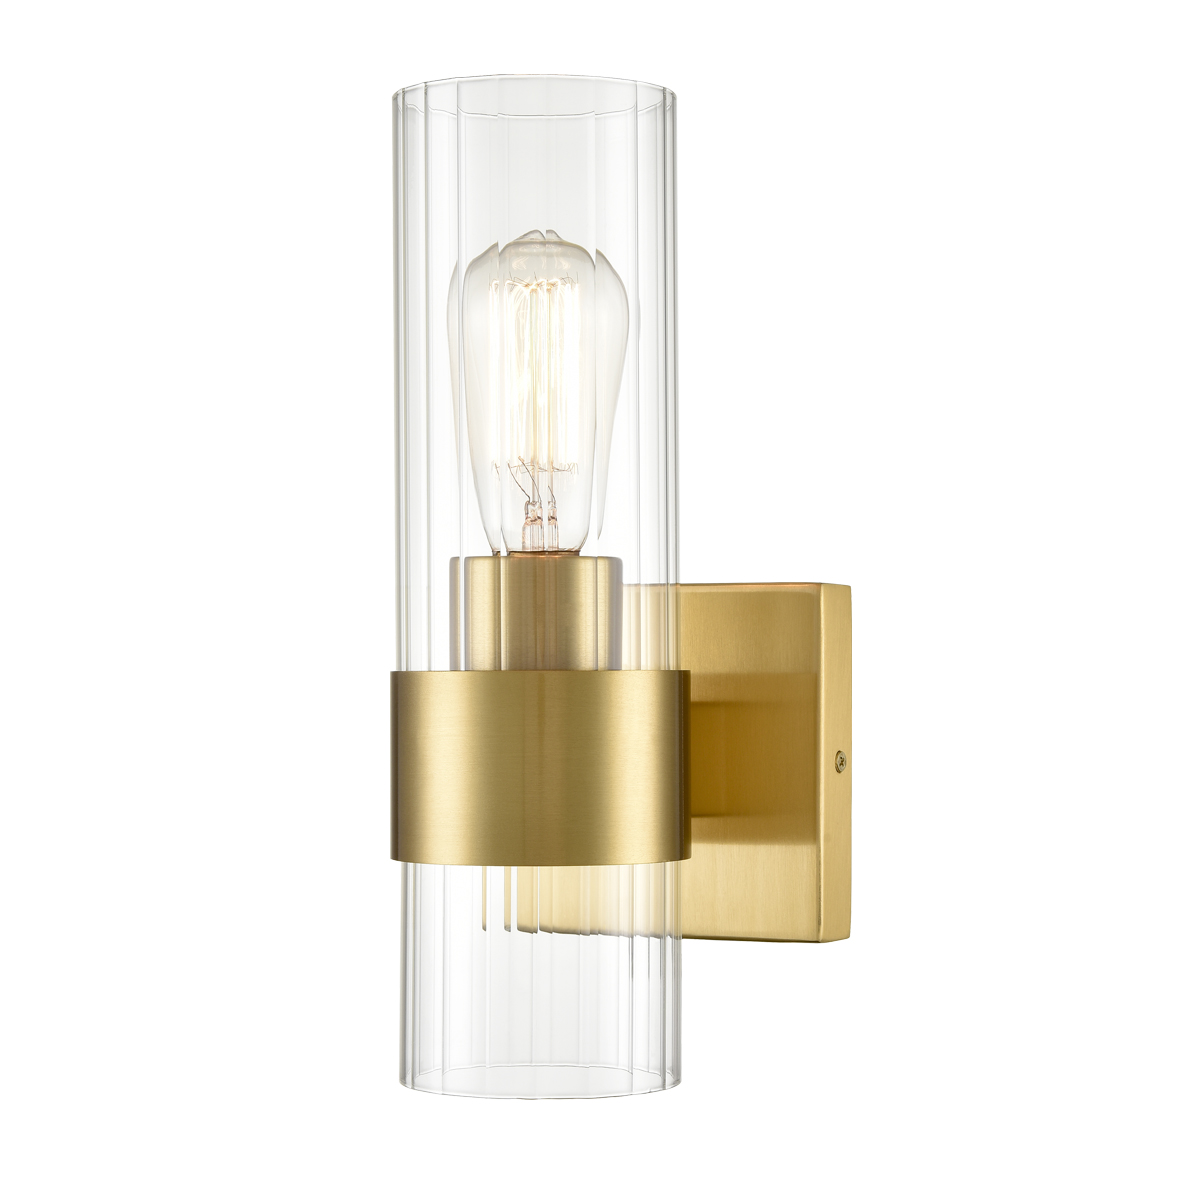 Modern Gold with Clear Glass Cylinder Wall Sconce 1-Light Bathroom Bedroom Vanity Lights Fixture Over Mirror